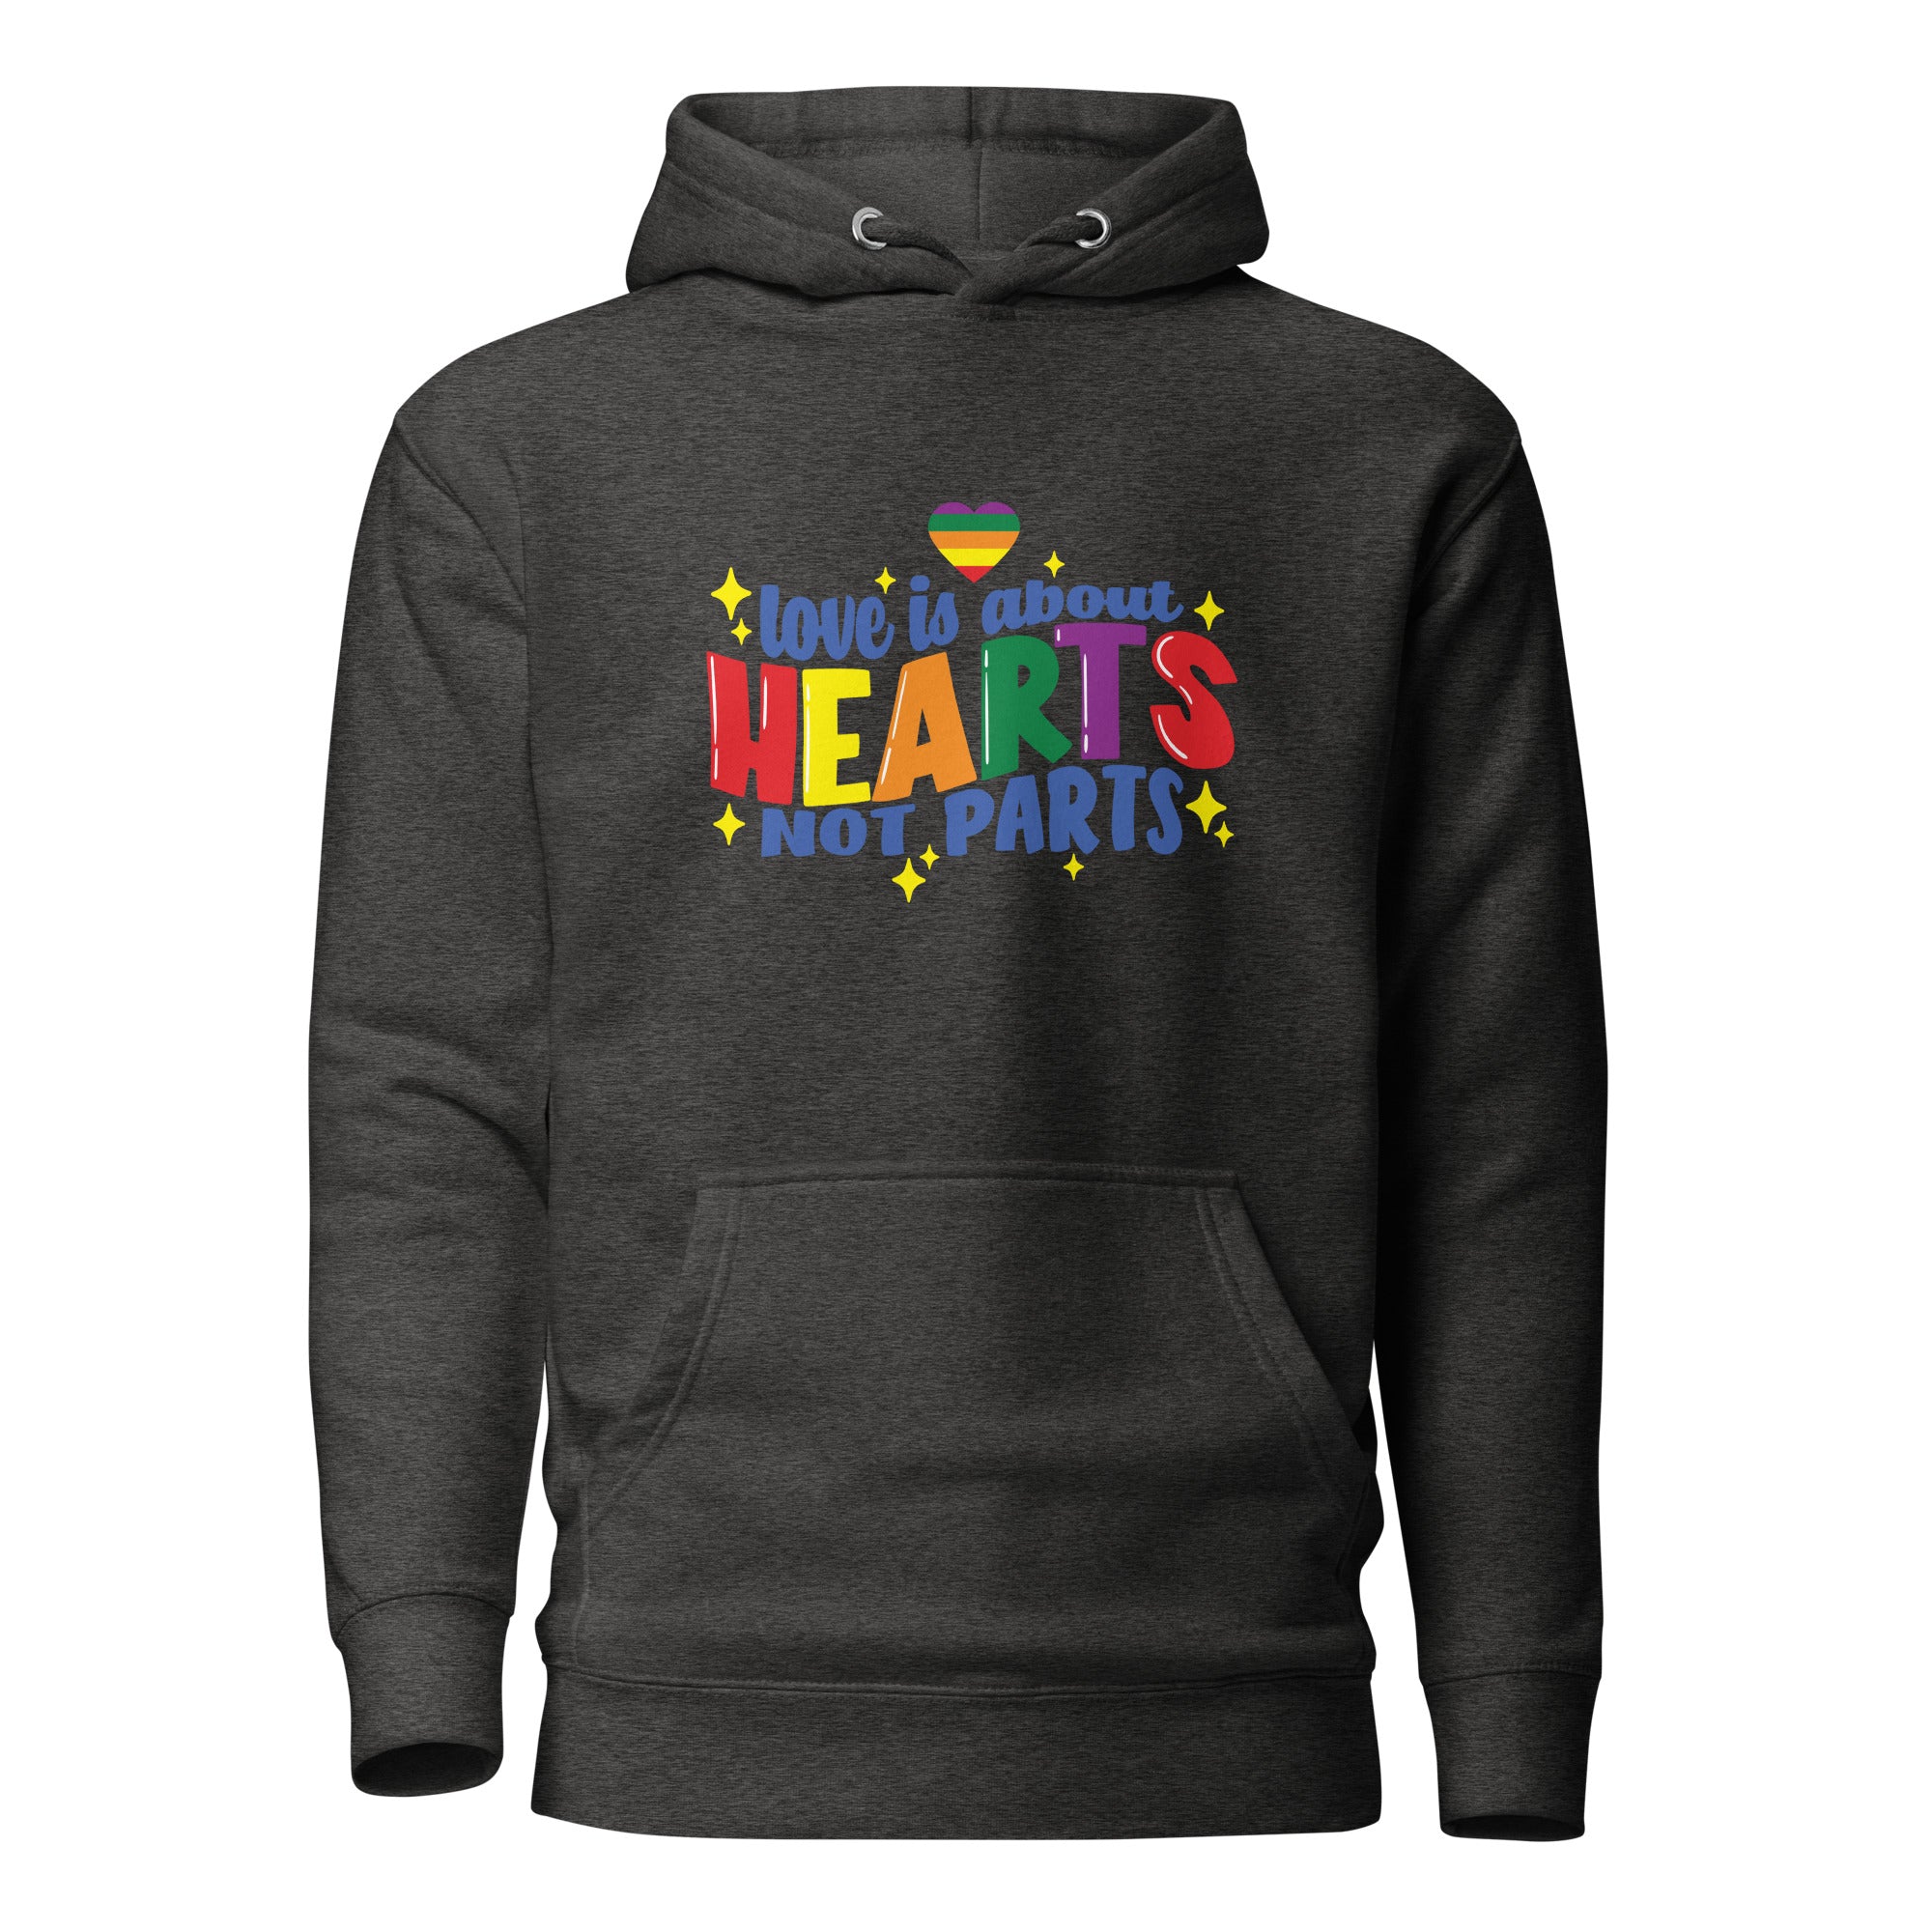 Unisex Hoodie- Love is about hearts not parts